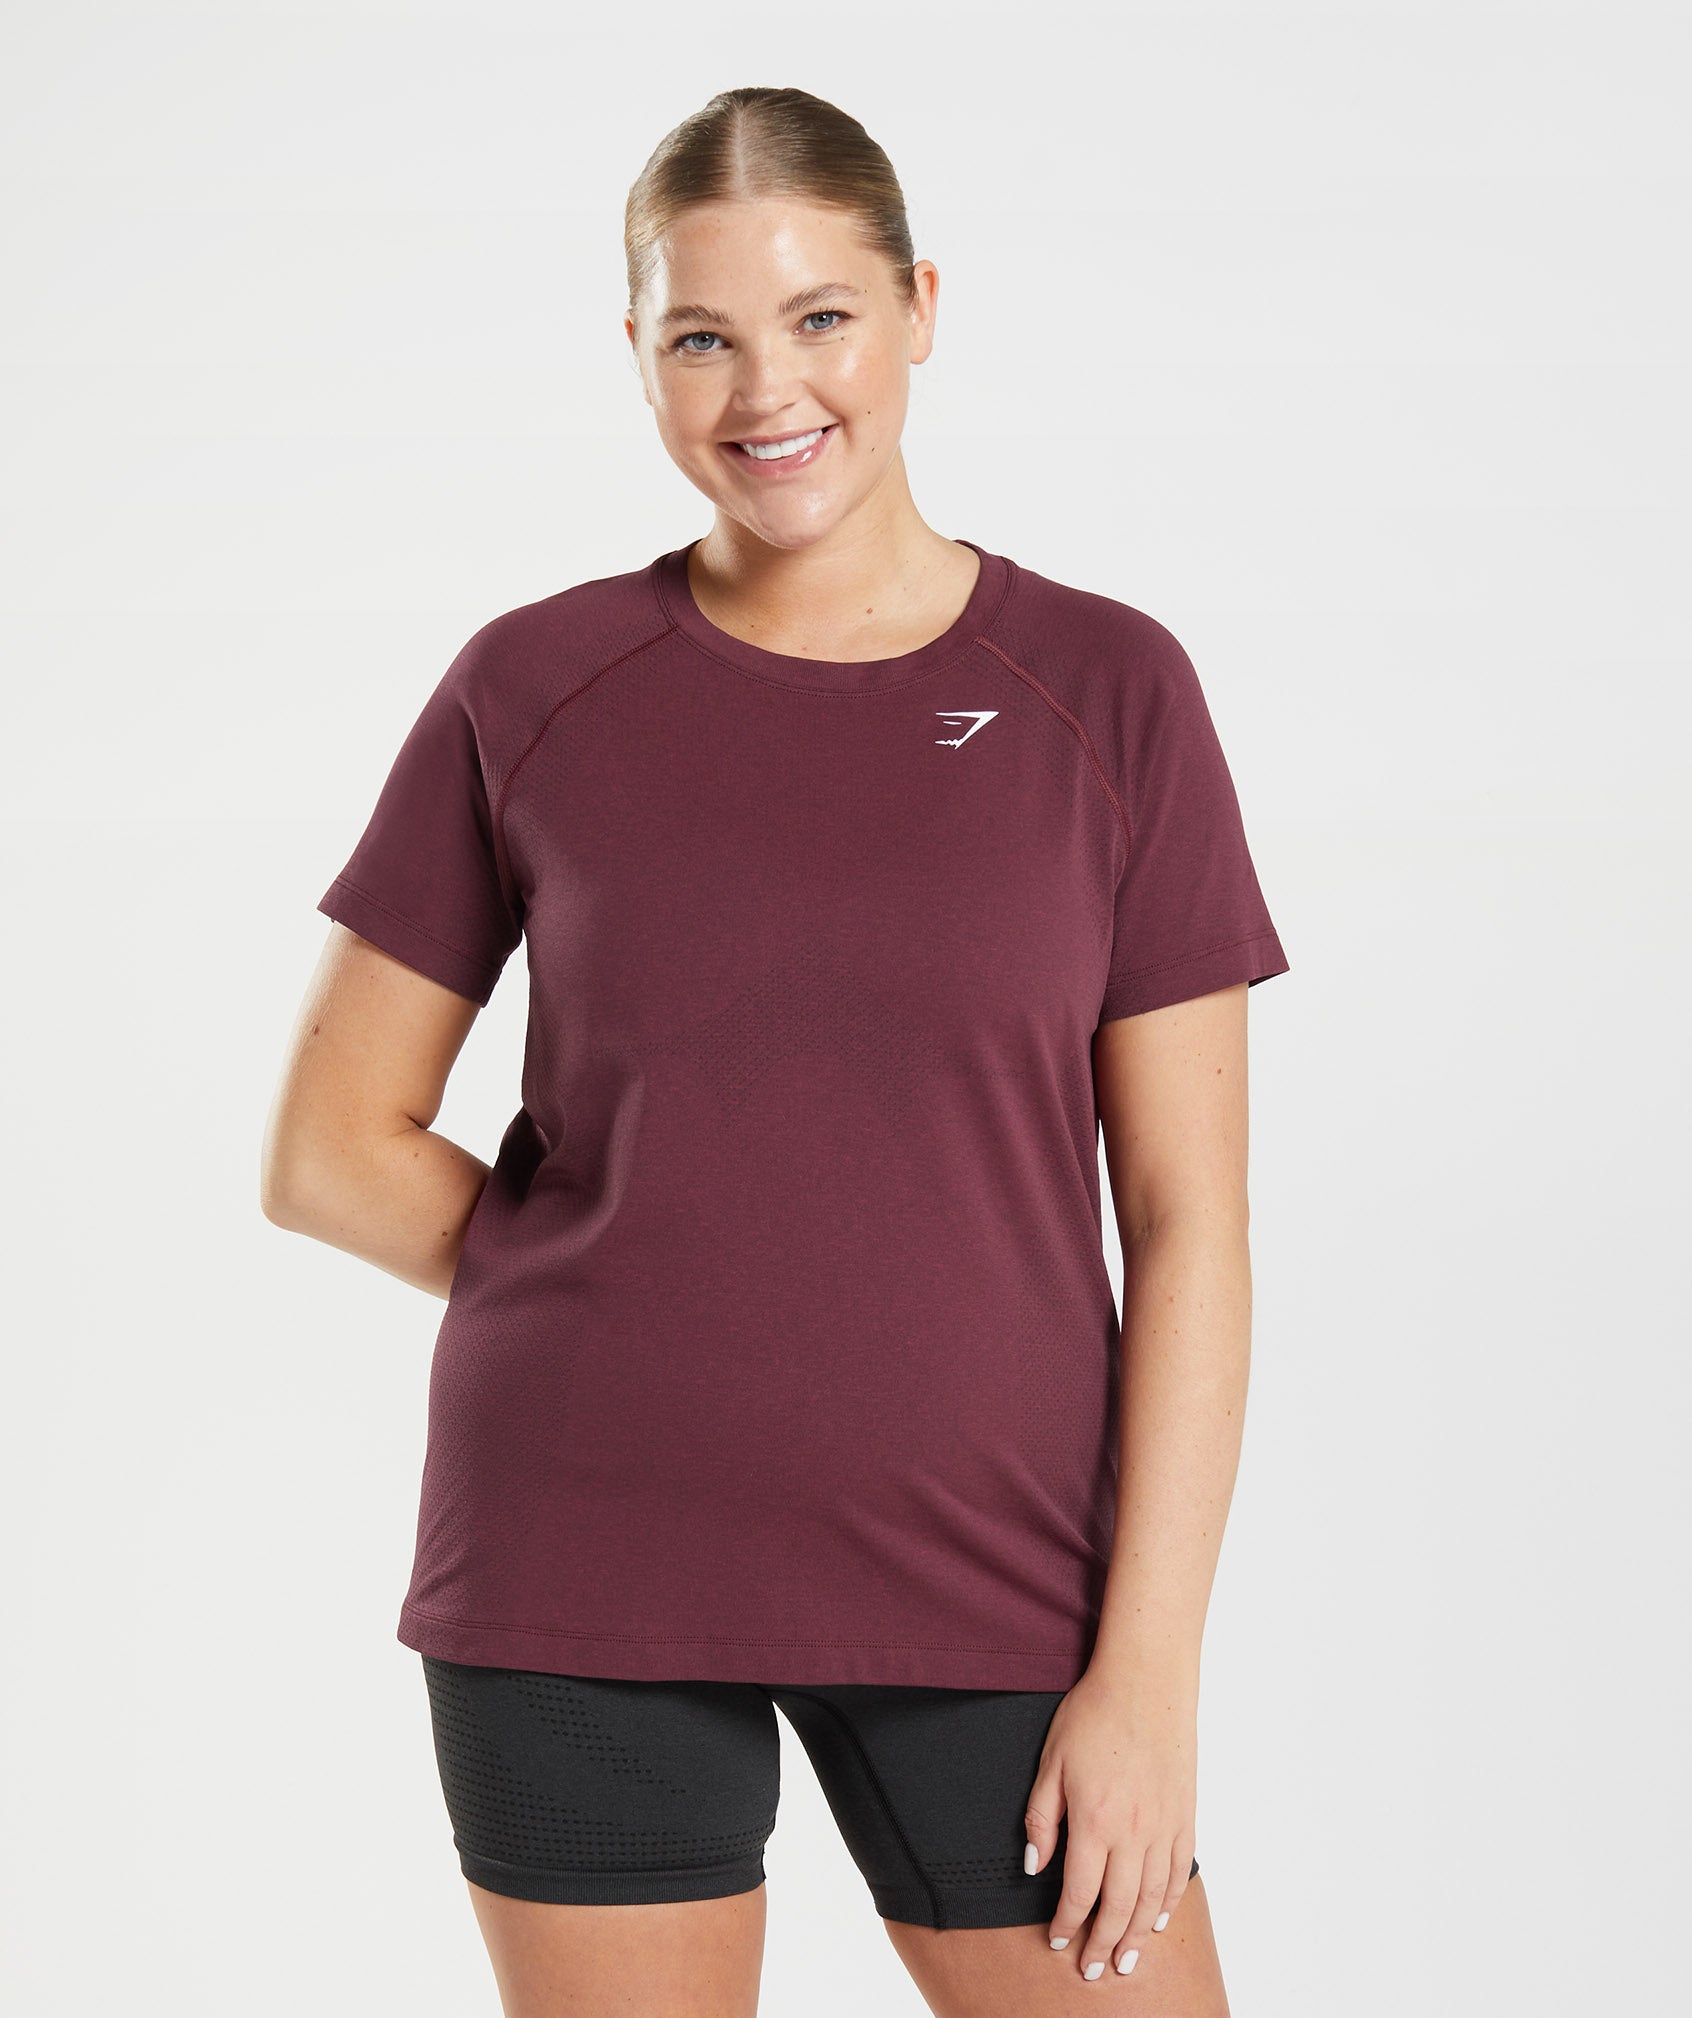 Vital Seamless 2.0 Light T-Shirt in Baked Maroon Marl - view 1